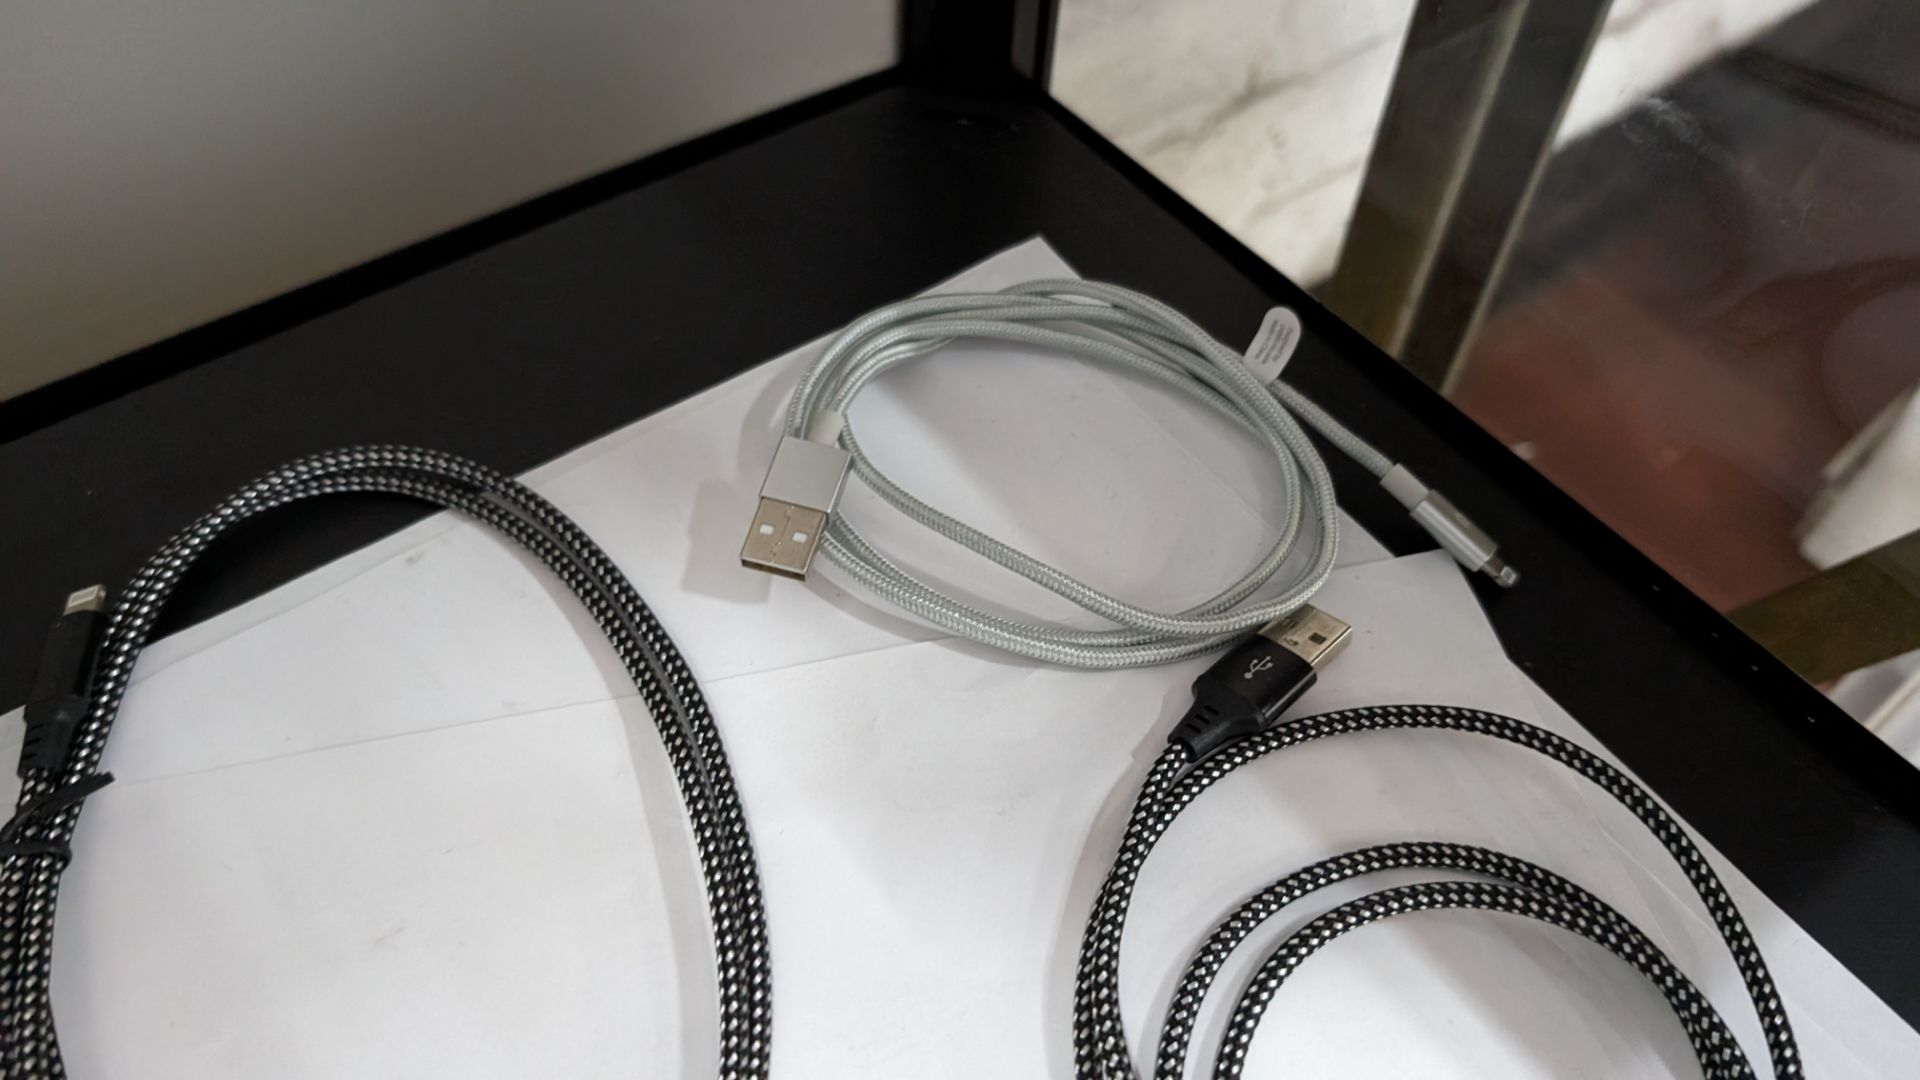 7 off assorted USB to lightning cables - Image 6 of 7